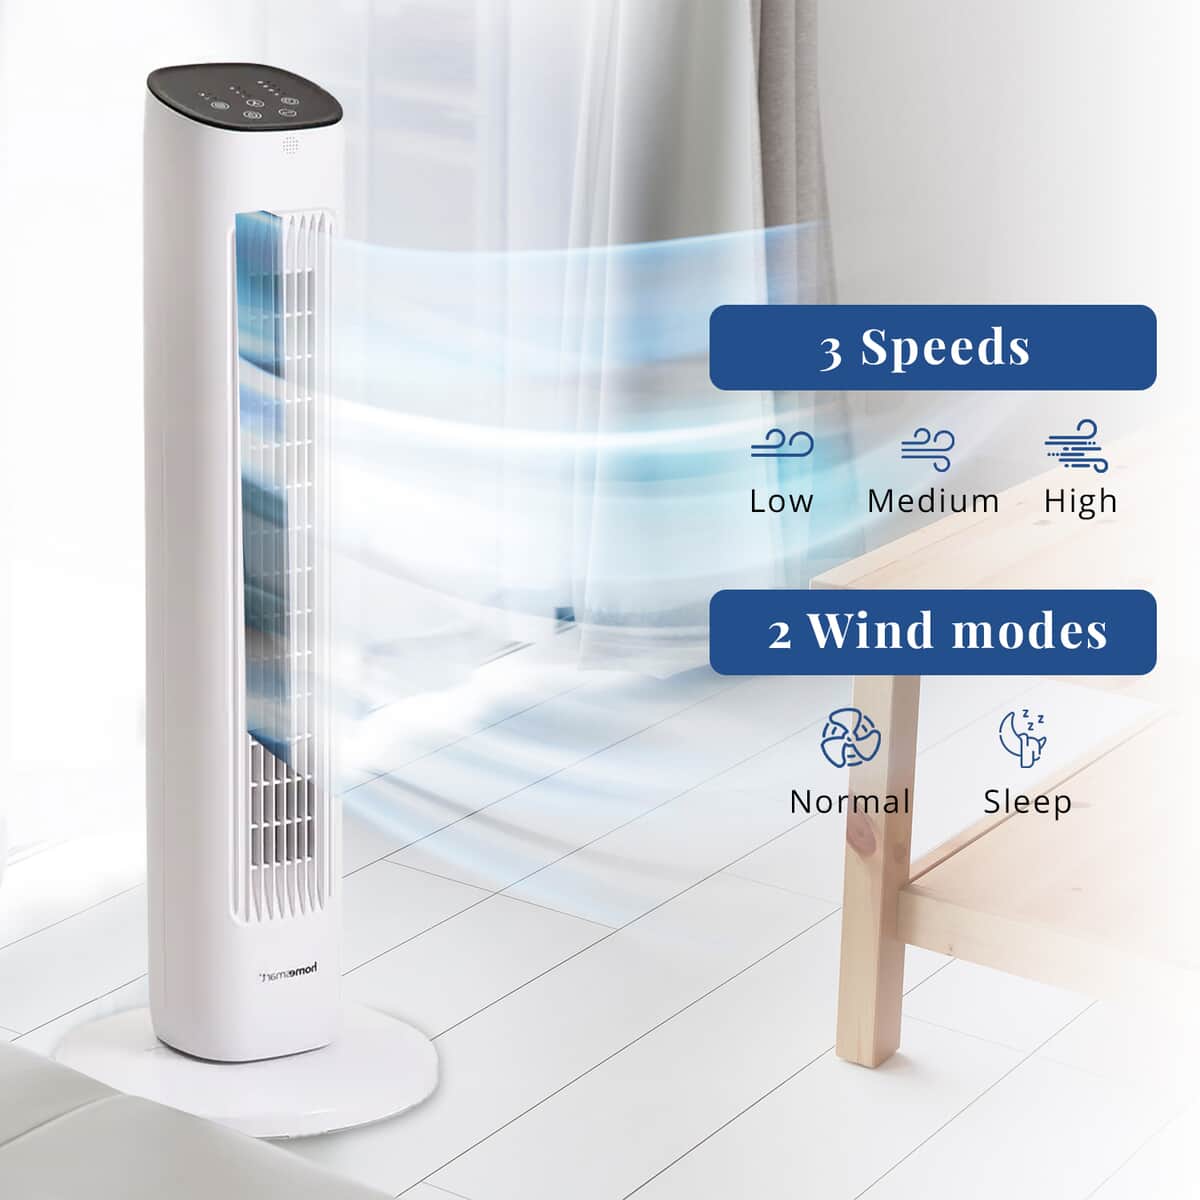 Homesmart Remote Control Tower Fan with Copper Motor in 2 Modes & 3 Speed - White image number 3